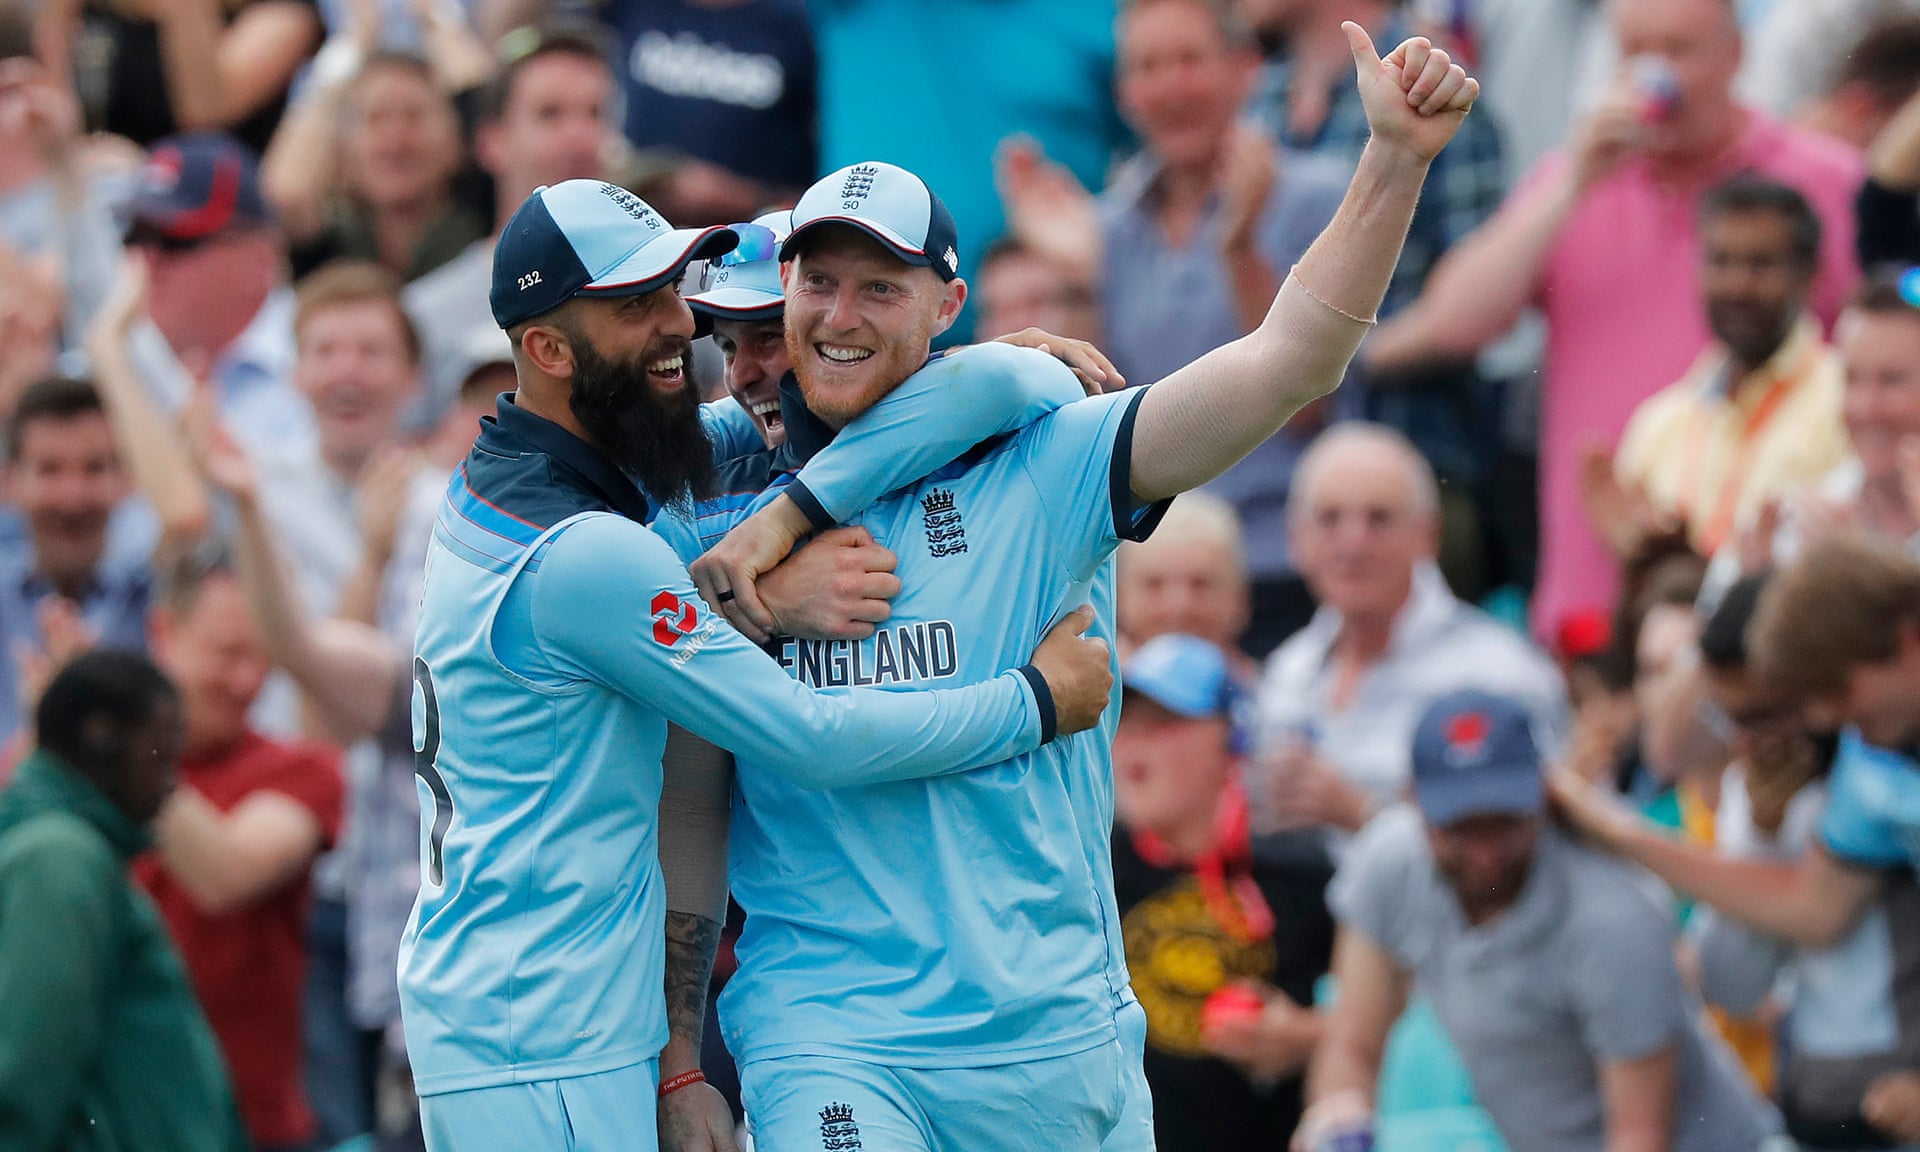 England beat South Africa by 104 runs in World Cup 2019 opener